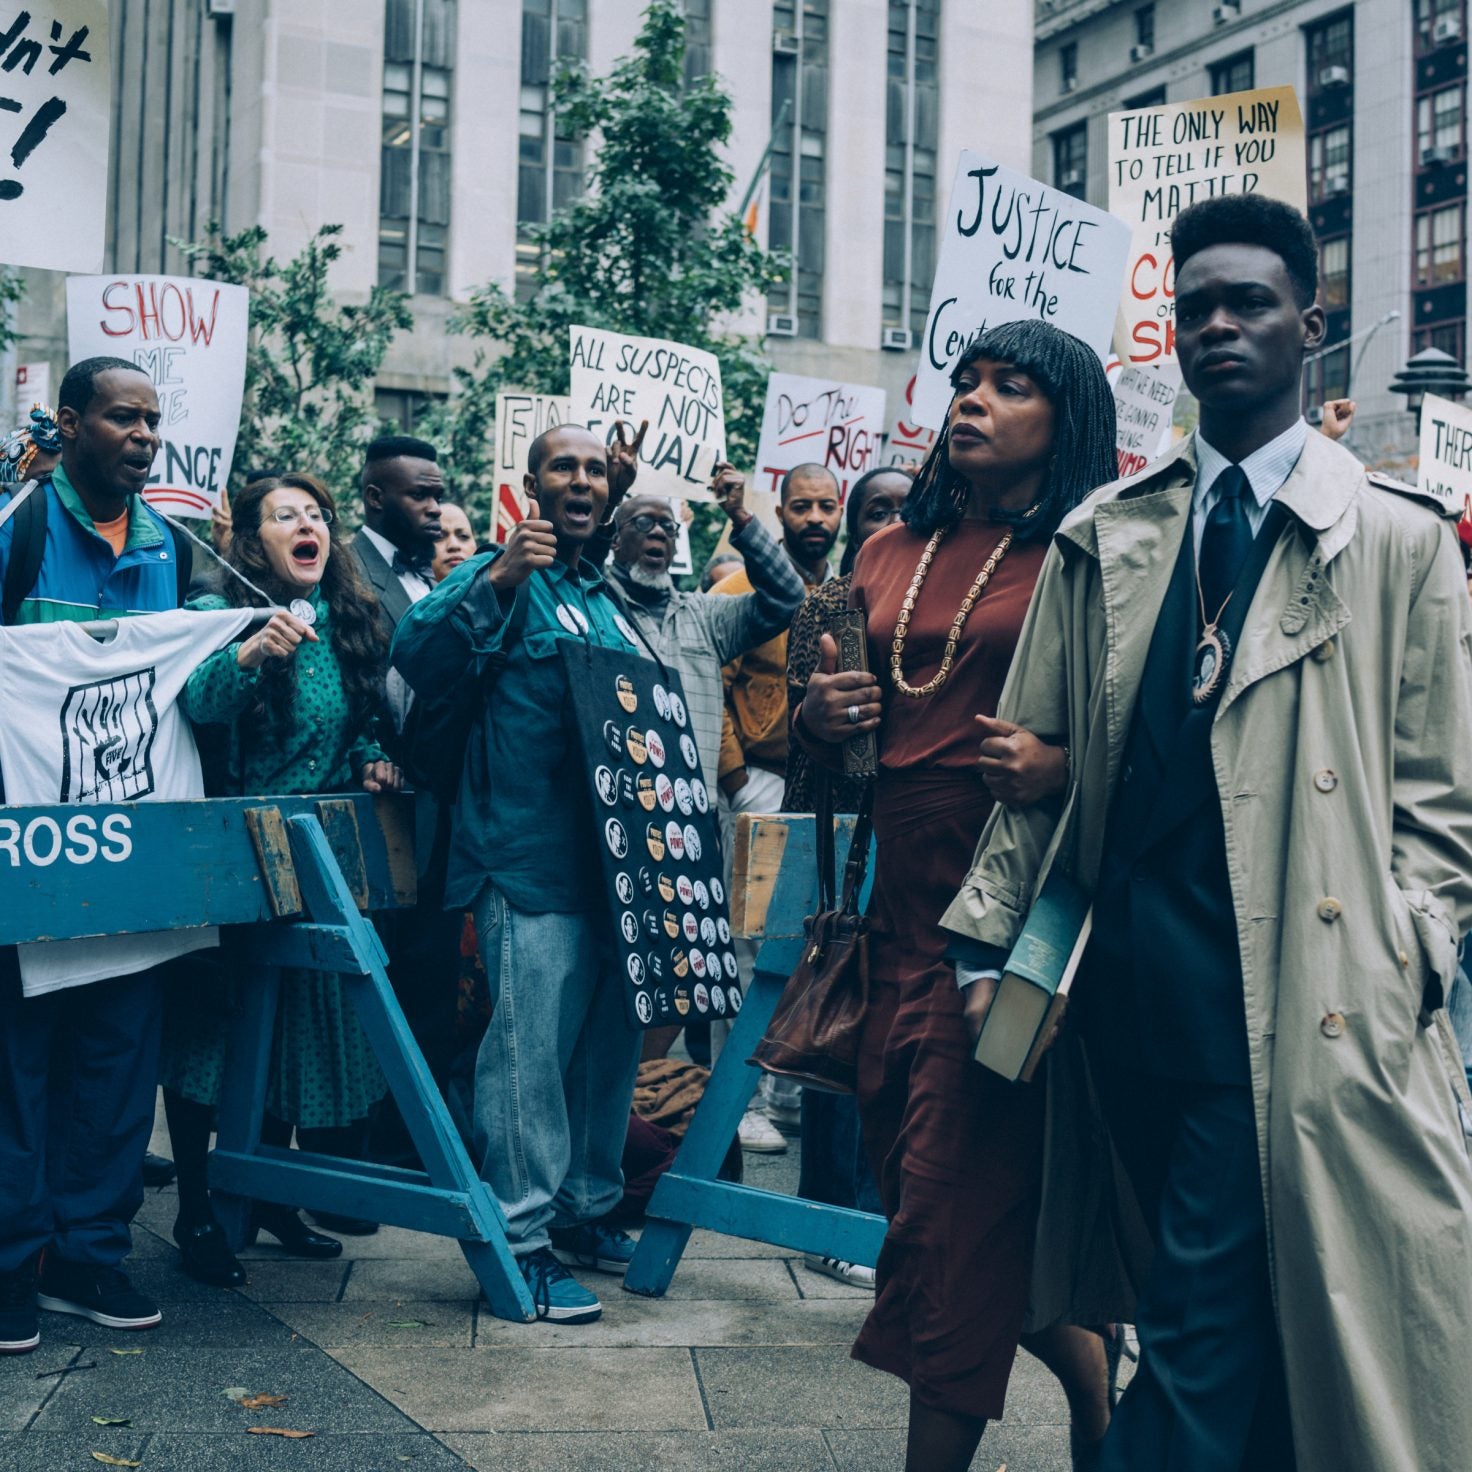 Here’s Your First Look At Ava DuVernay’s Series On The Central Park Five